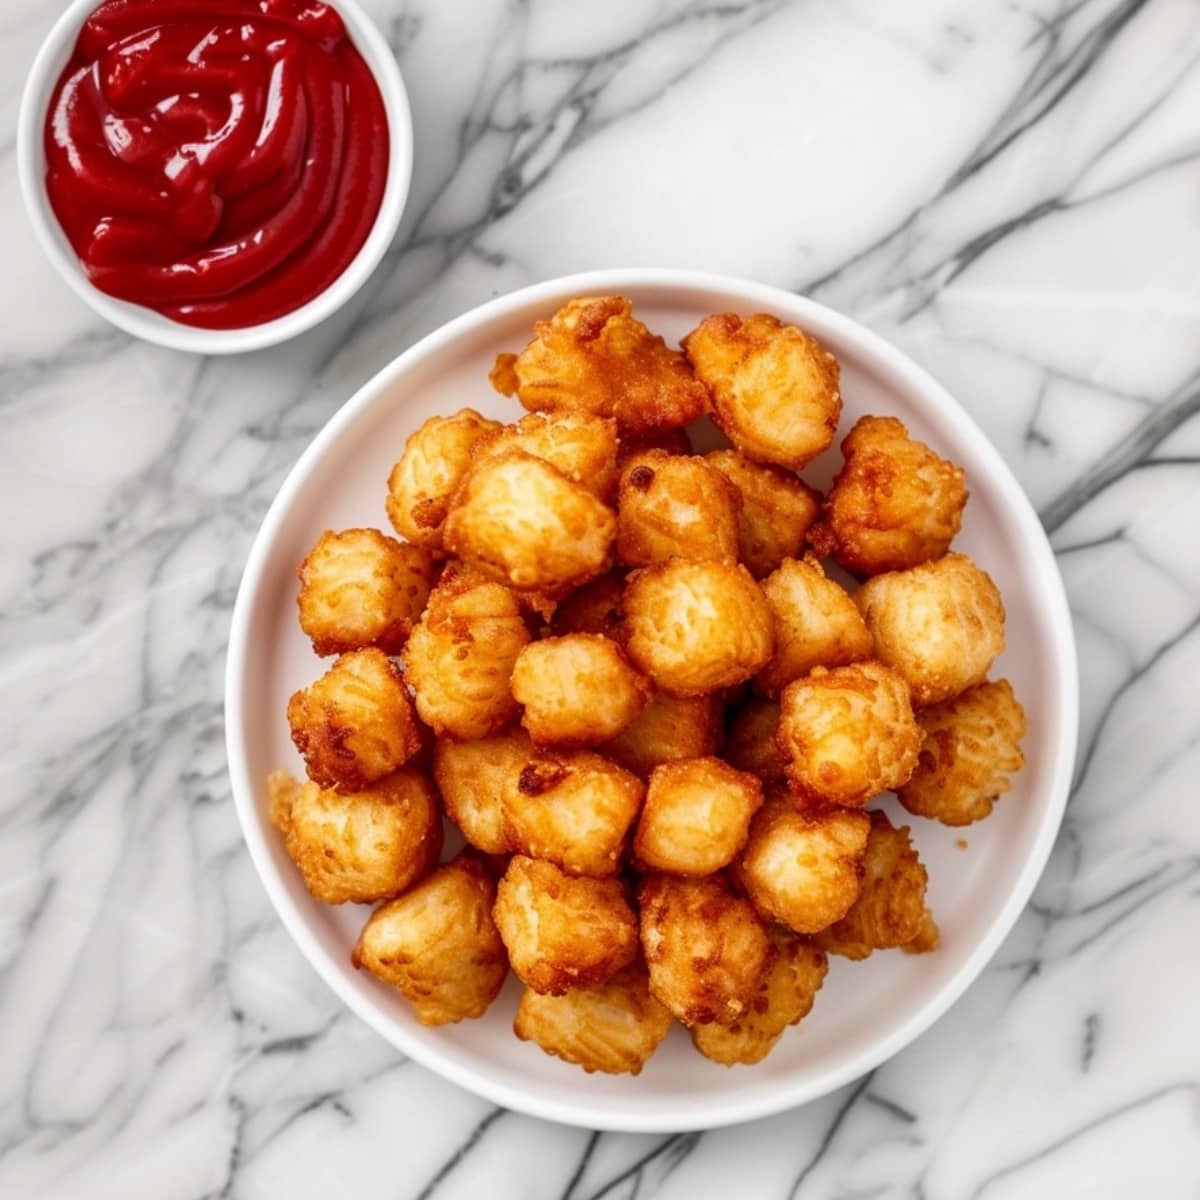 A pile of tater tots in a white bowl with ketchup on the side